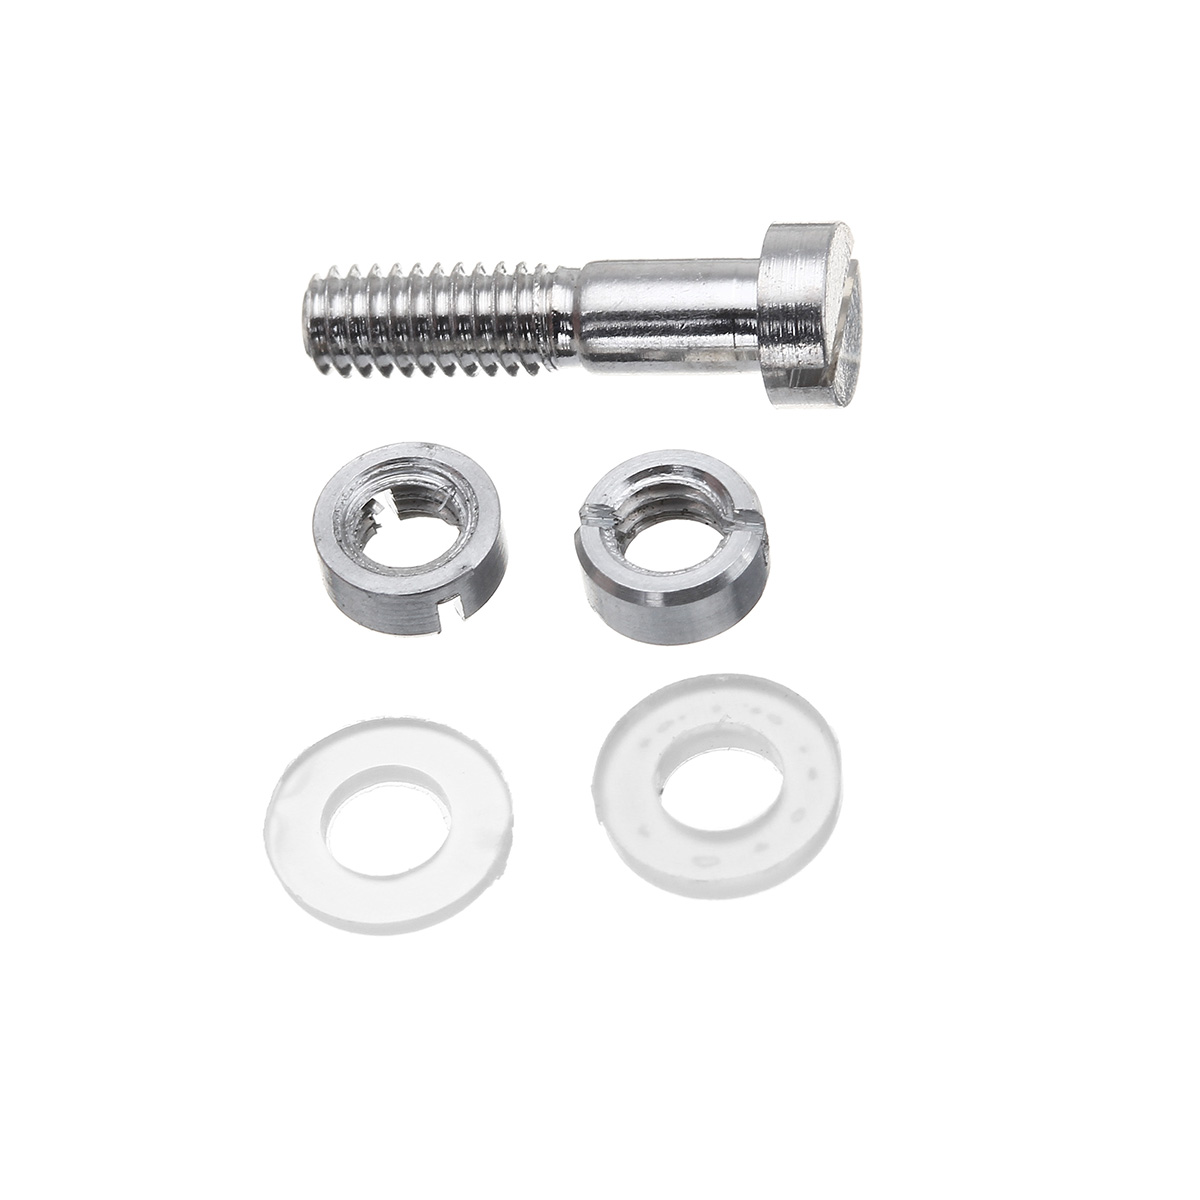 7.5mm/10.5mm/11.5mm/13.5mm/16.5mm M2.5mm Mounting Screw Set For Record Player 18